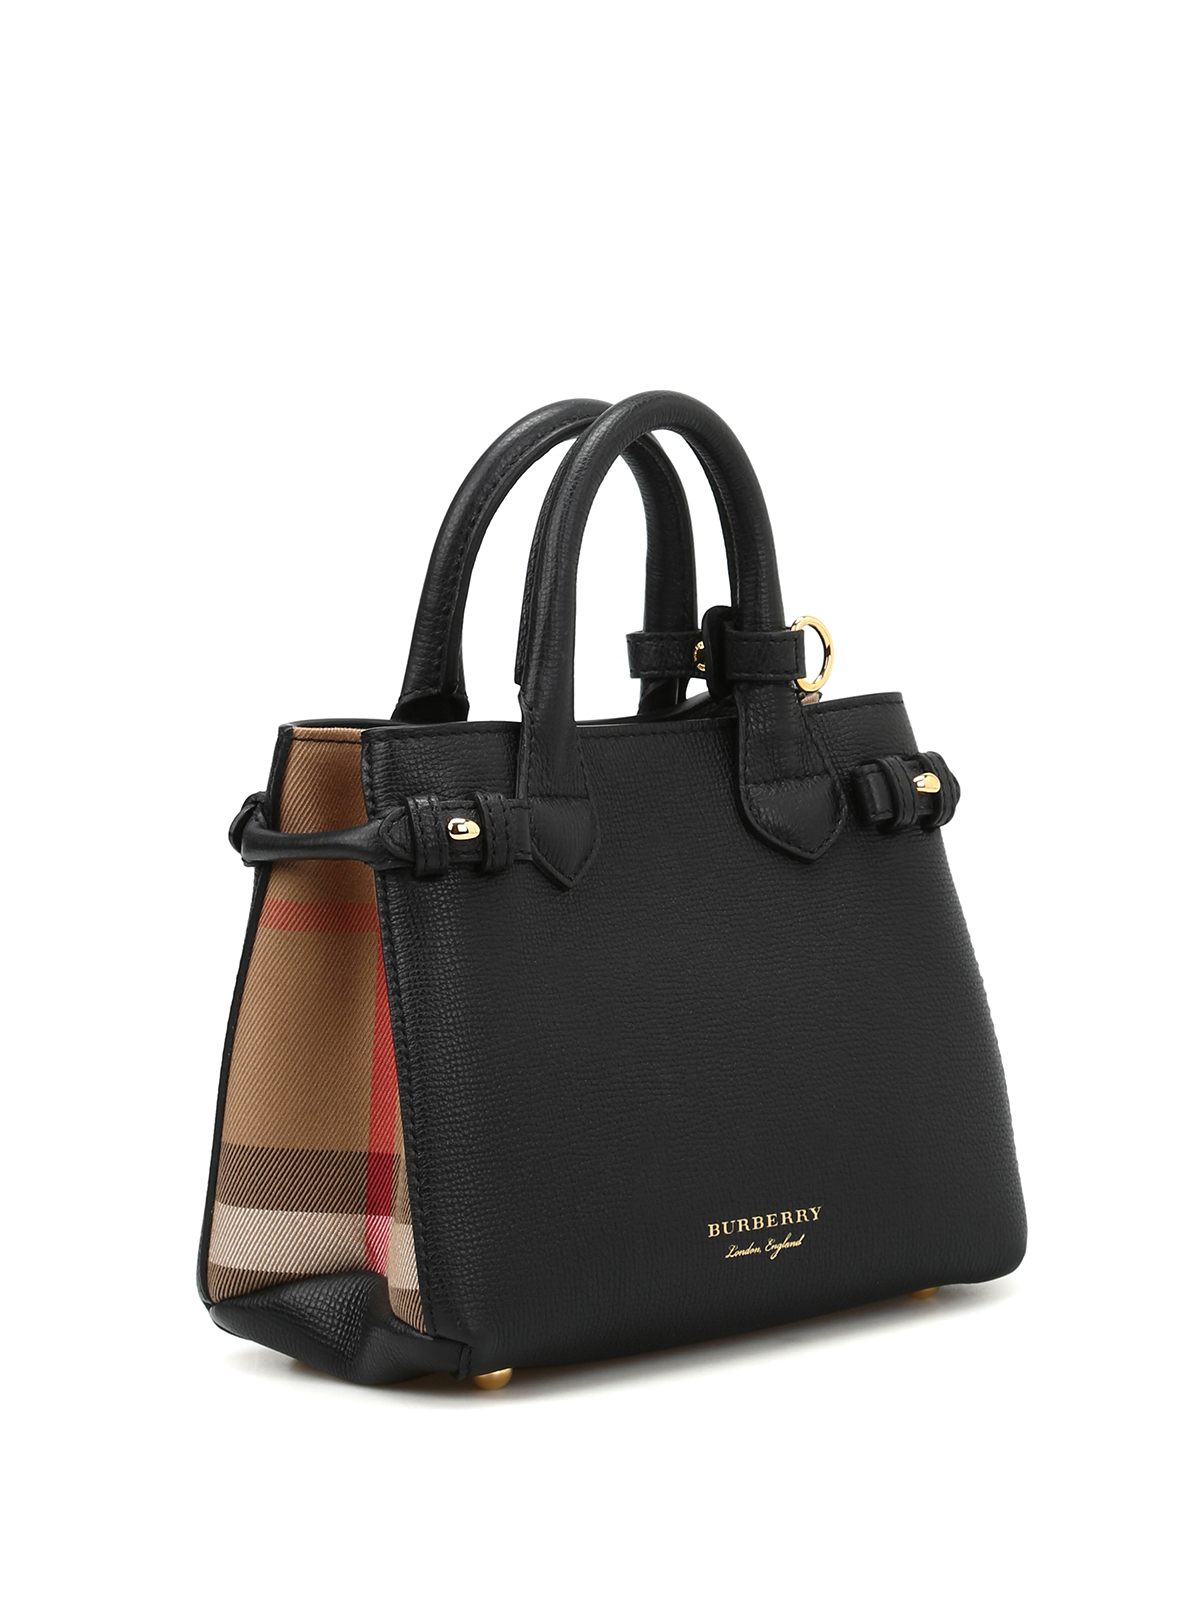 Burberry - The Banner baby leather bag 